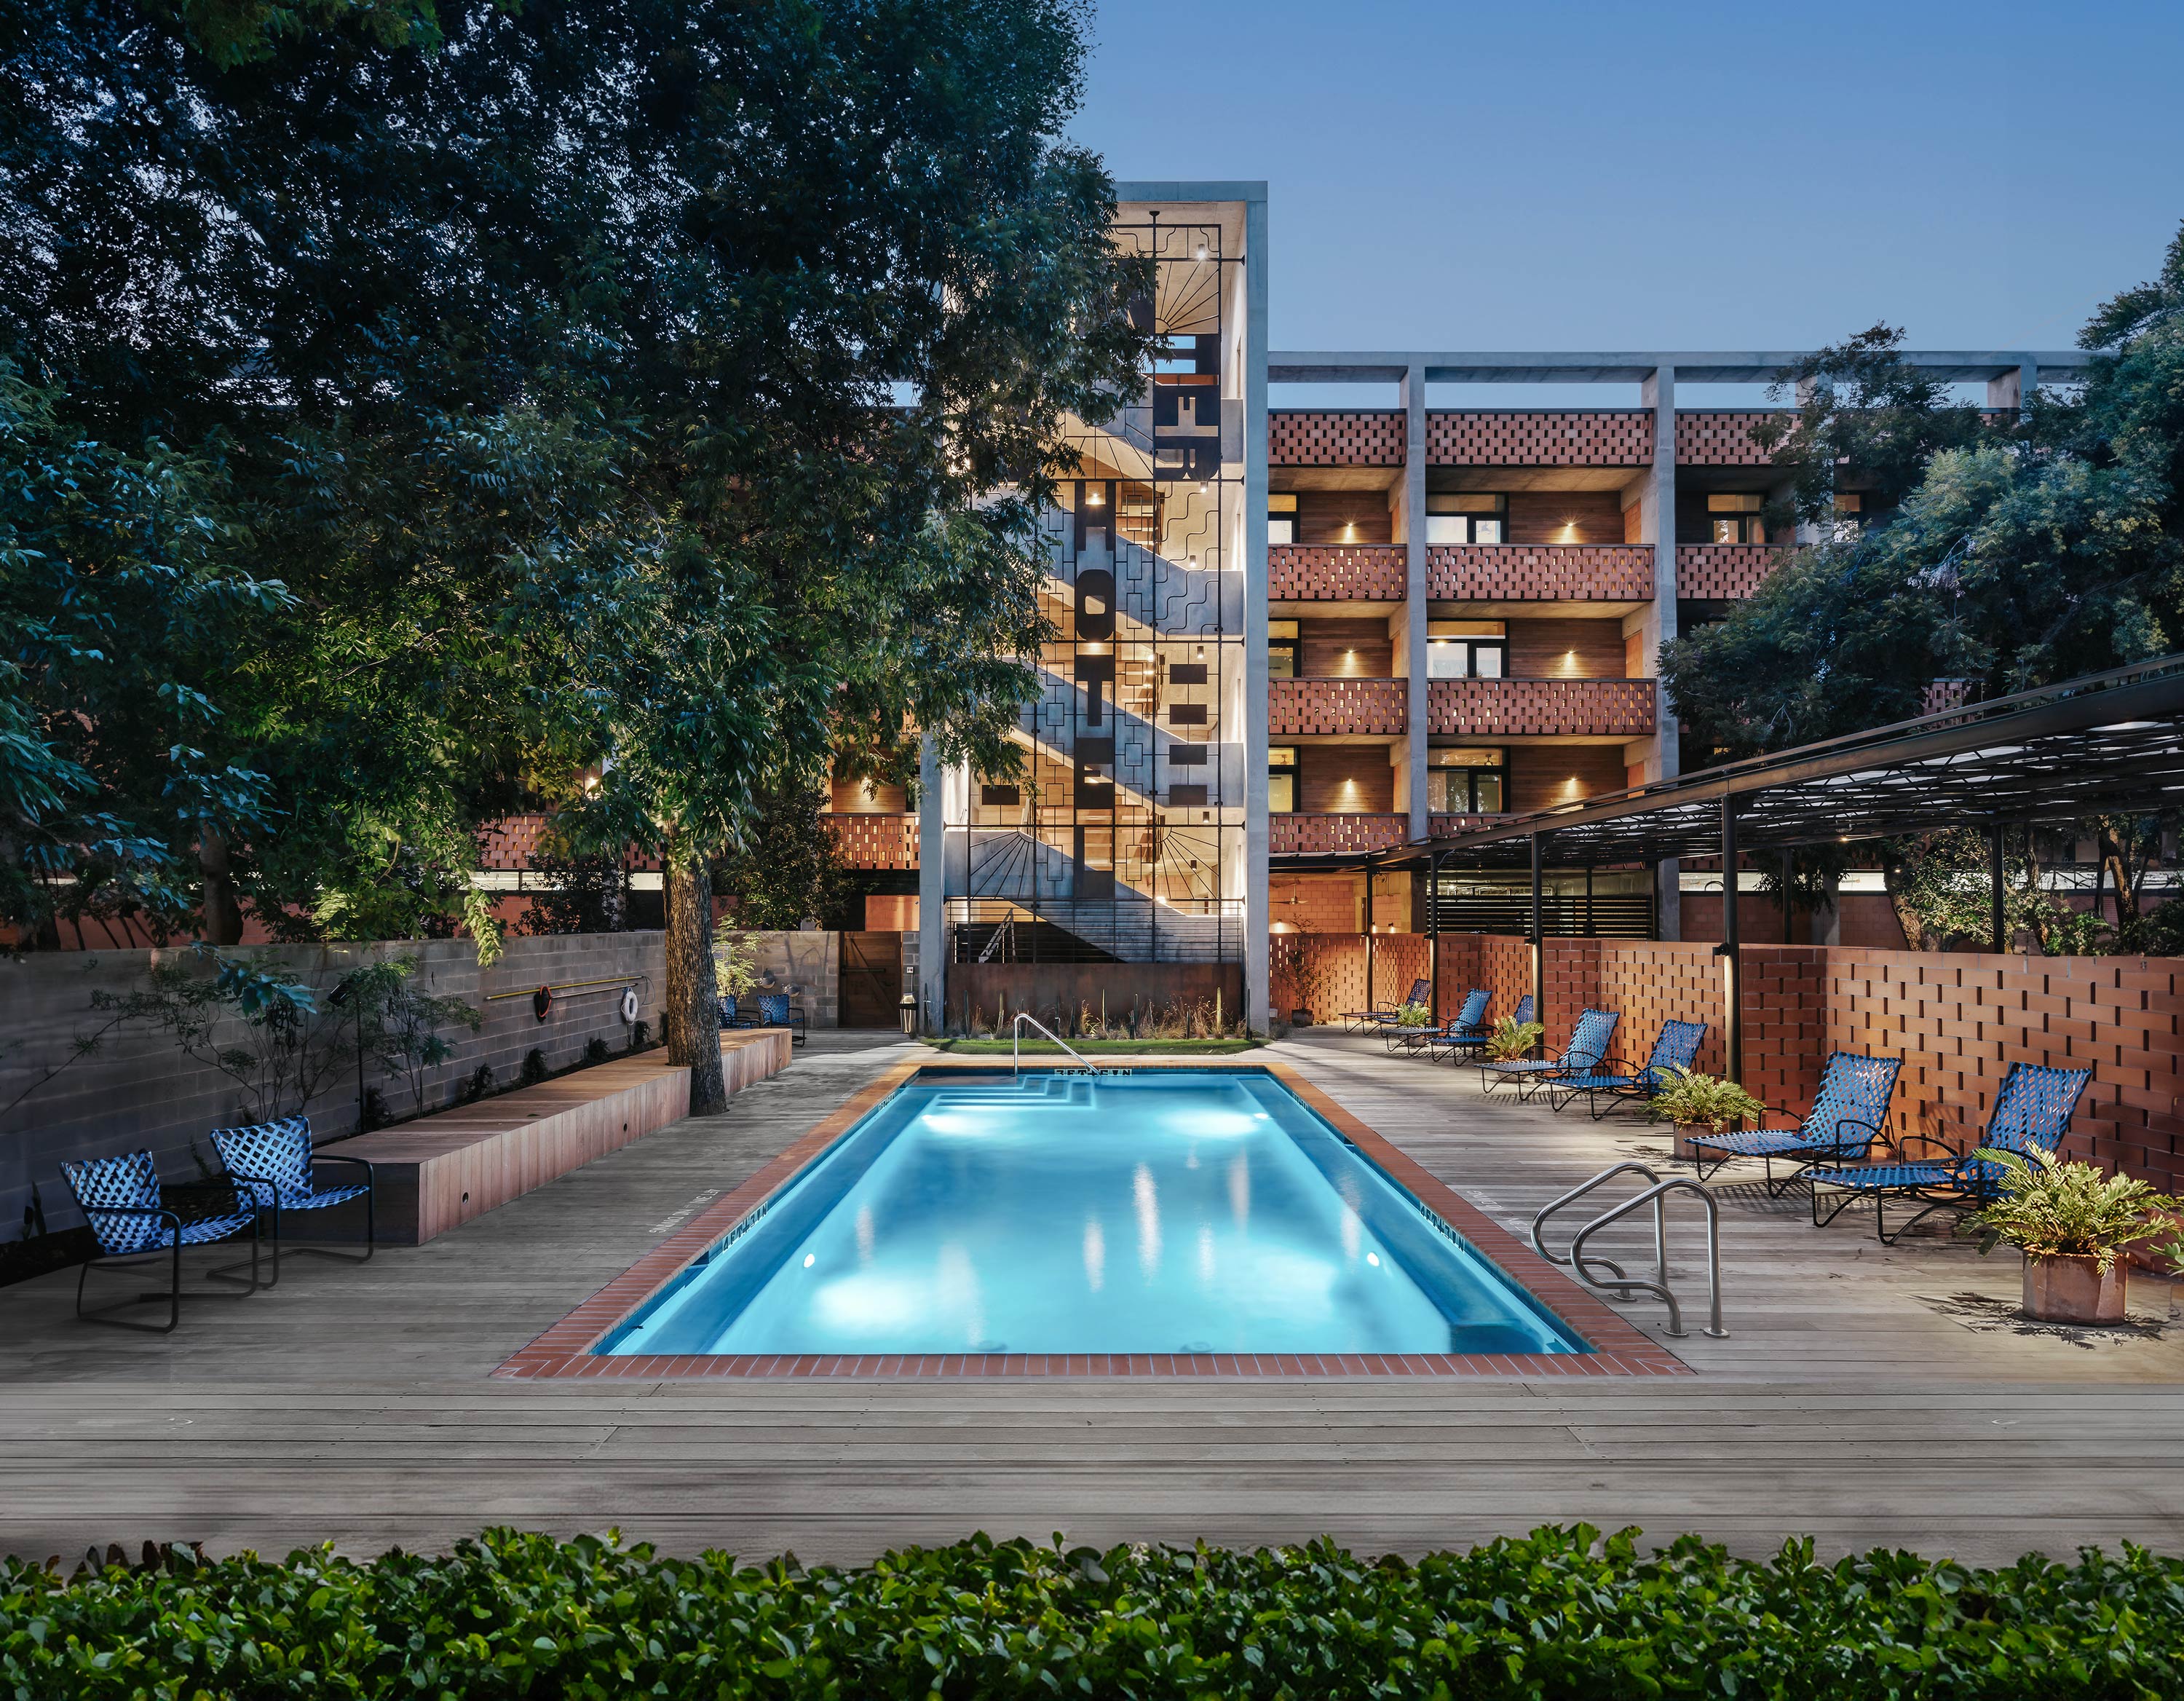 Exterior photo of the Carpenter Hotel by Specht Novak Architects. Shot by Chase Daniel, featuring the pool, lounging area surrounded by trees, and the hotel structure in the background.